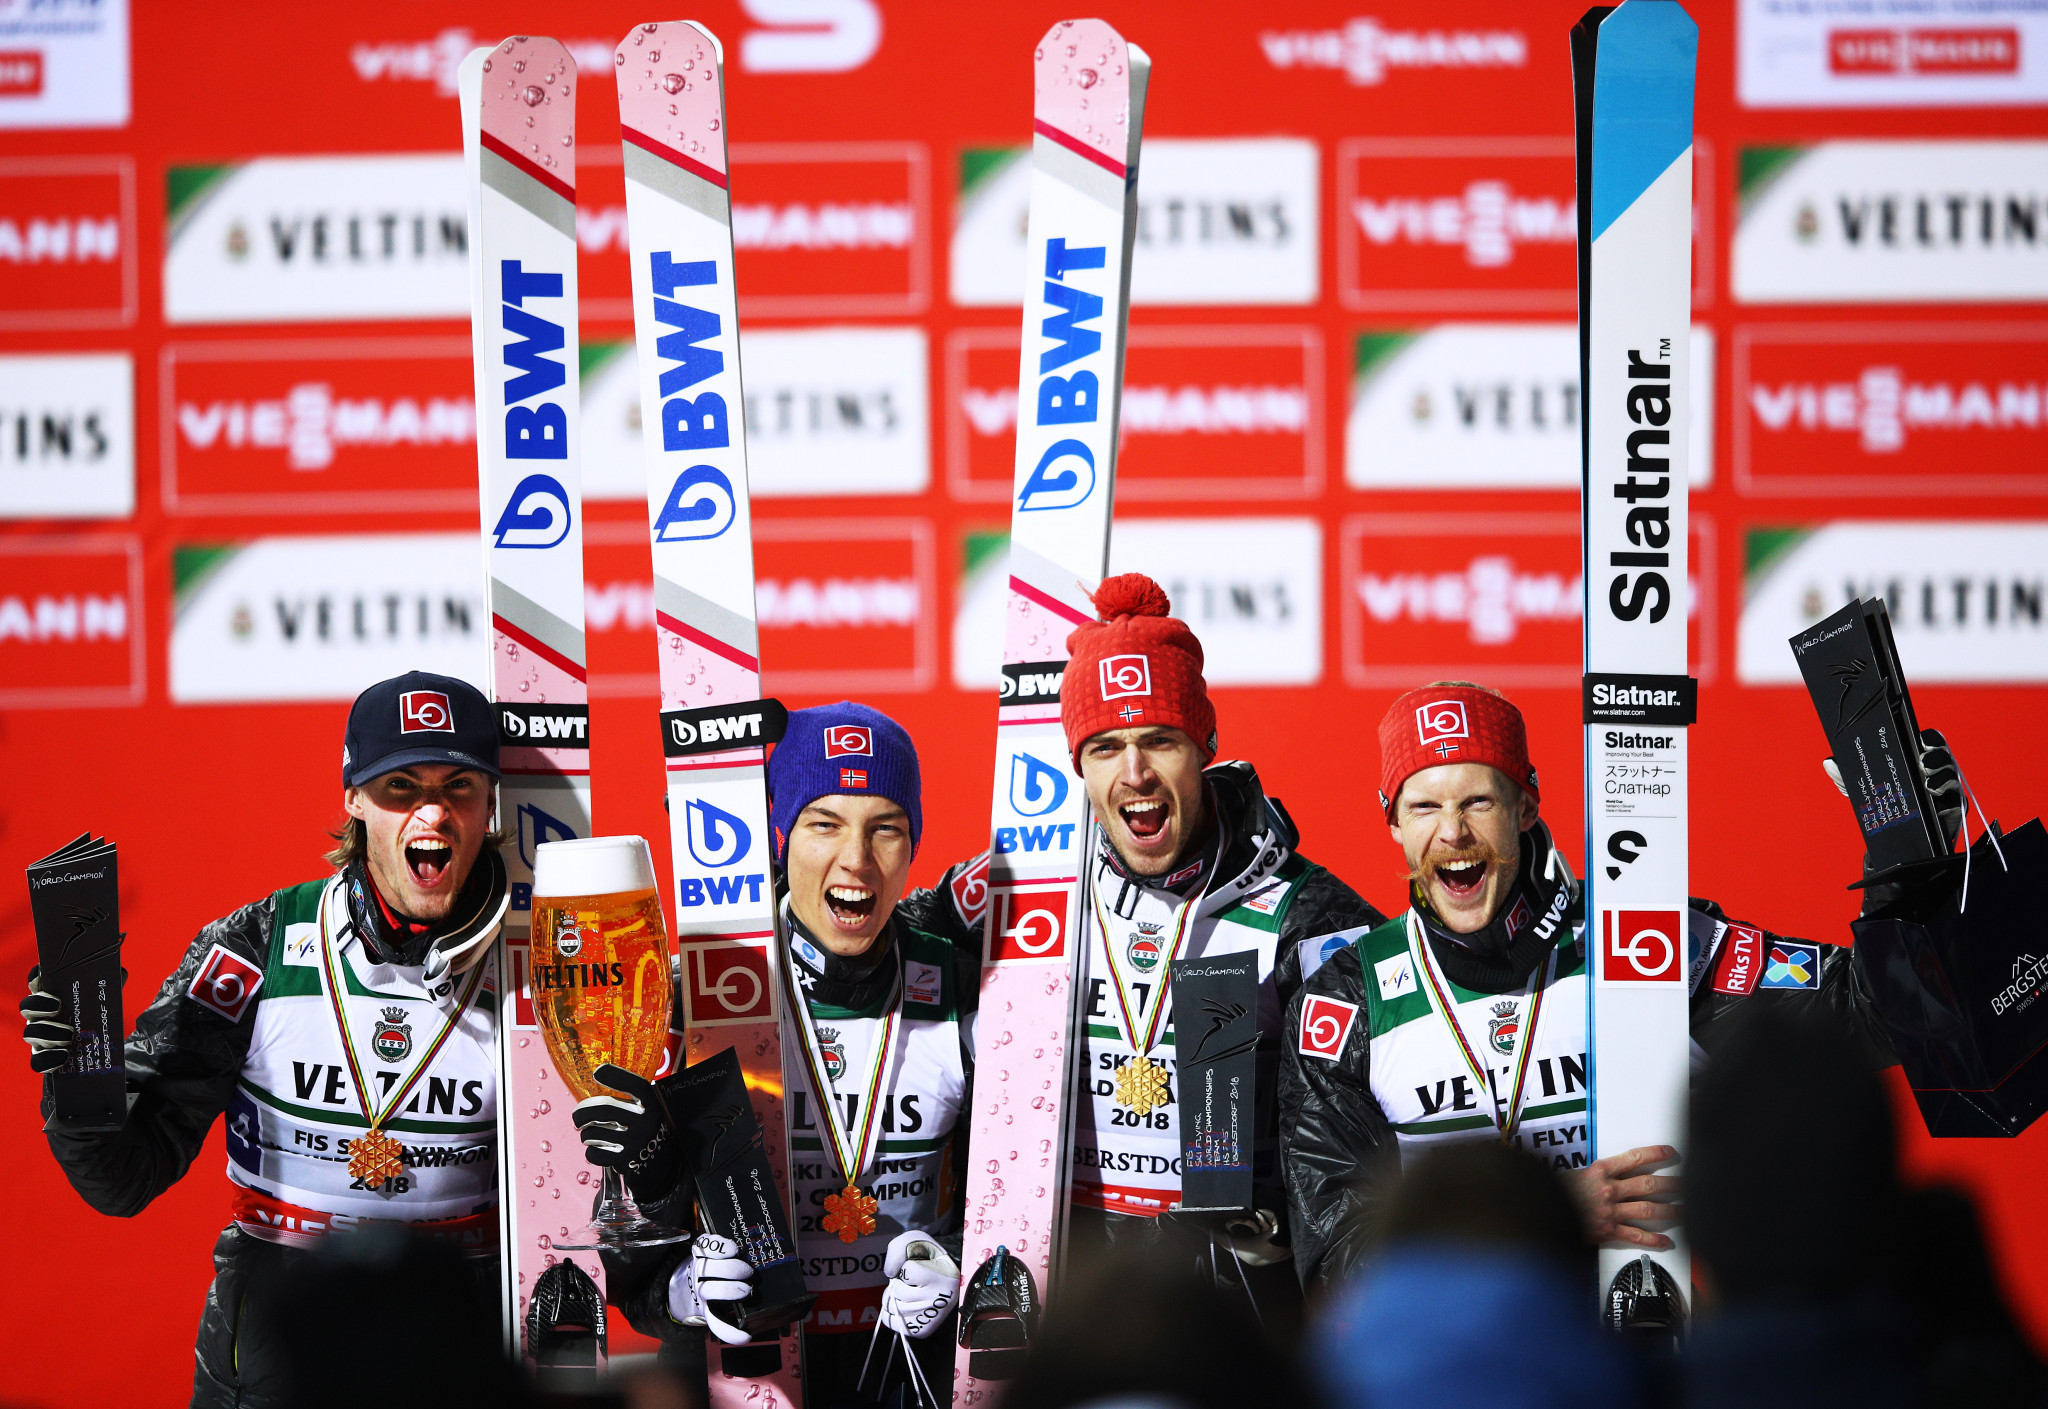 Norway defended their team title at the FIS Ski Flying World Championships ©Getty Images